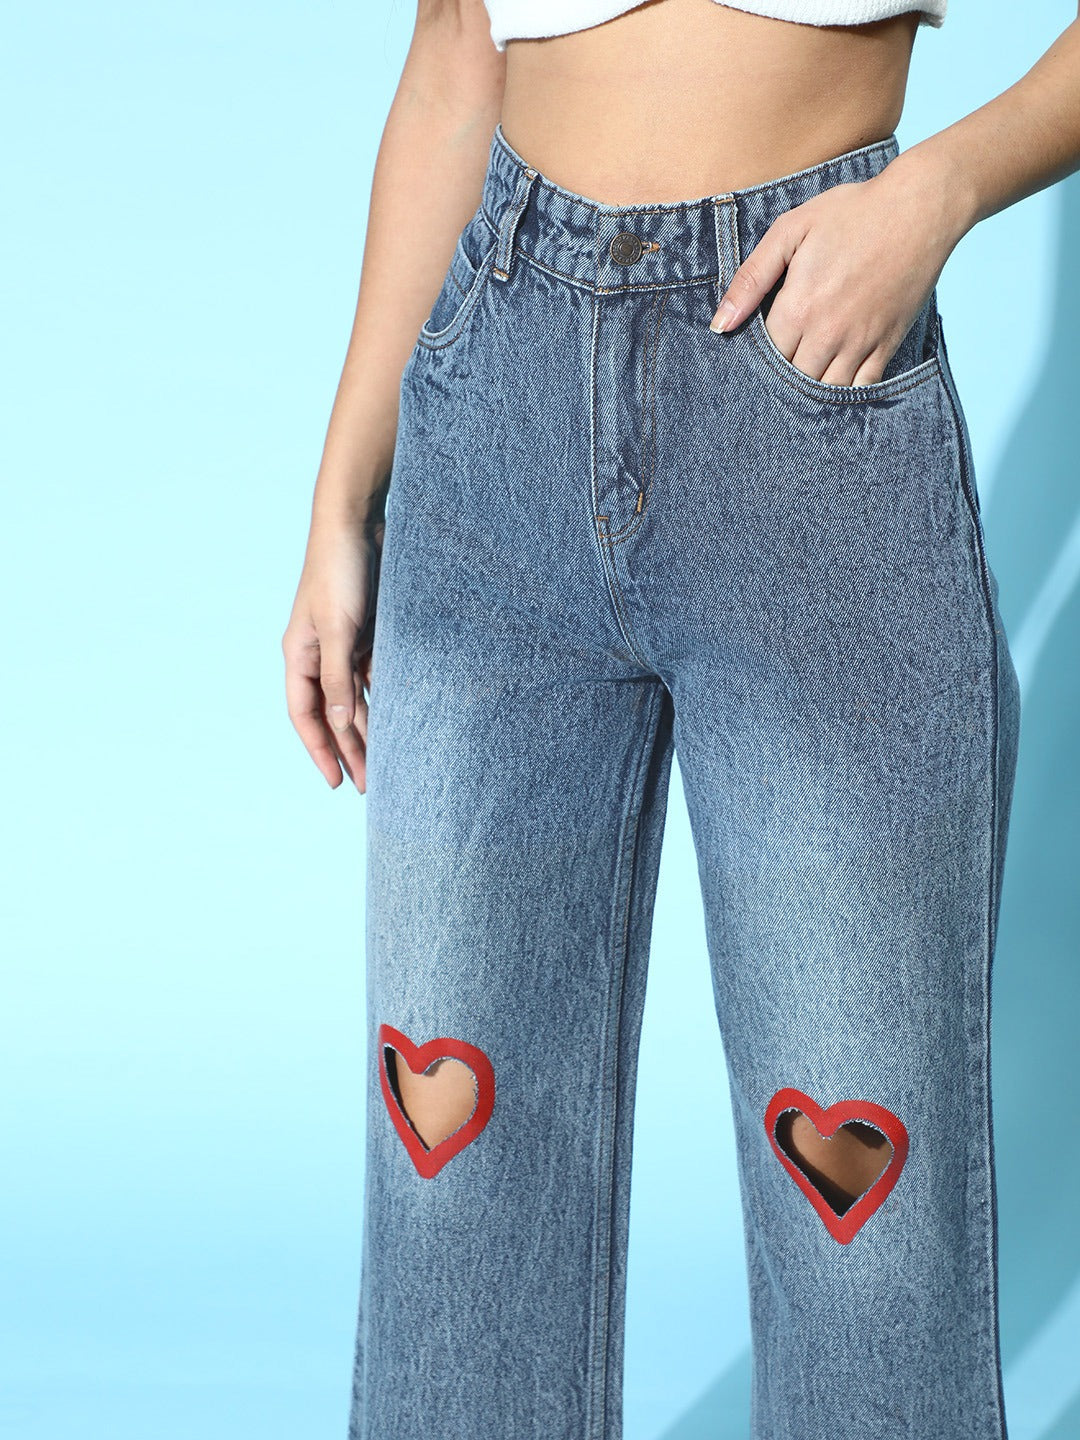 Blue Heart Cut Out Straight Jeans